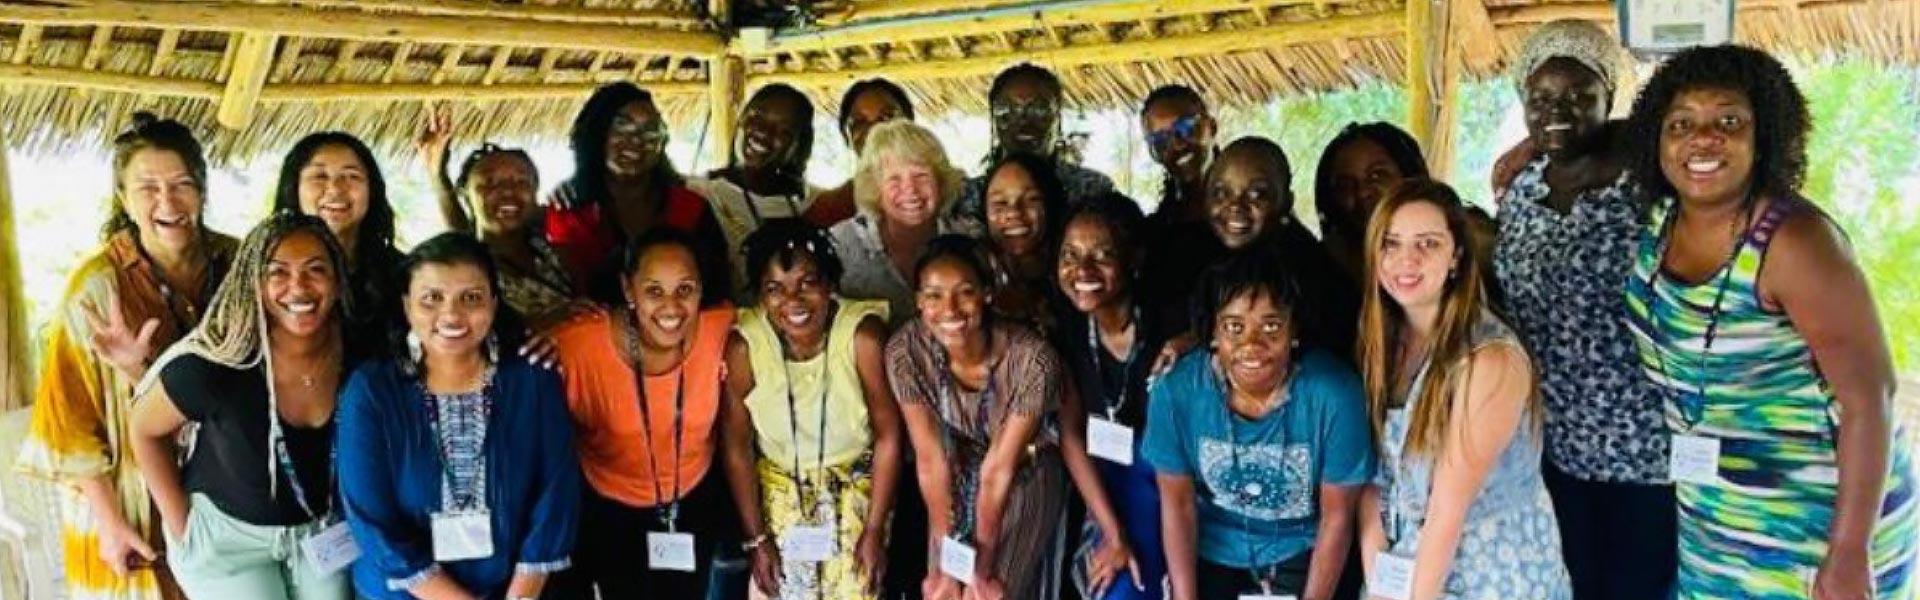 Women in Leadership, Africa

DYAN LARMEY & YOUNG LIFE AFRICA - THE WOMEN'S LEADERSHIP INITIATIVE

God is using the Women’s Leadership Initiative to break cultural norms and transform longstanding views of women ...
